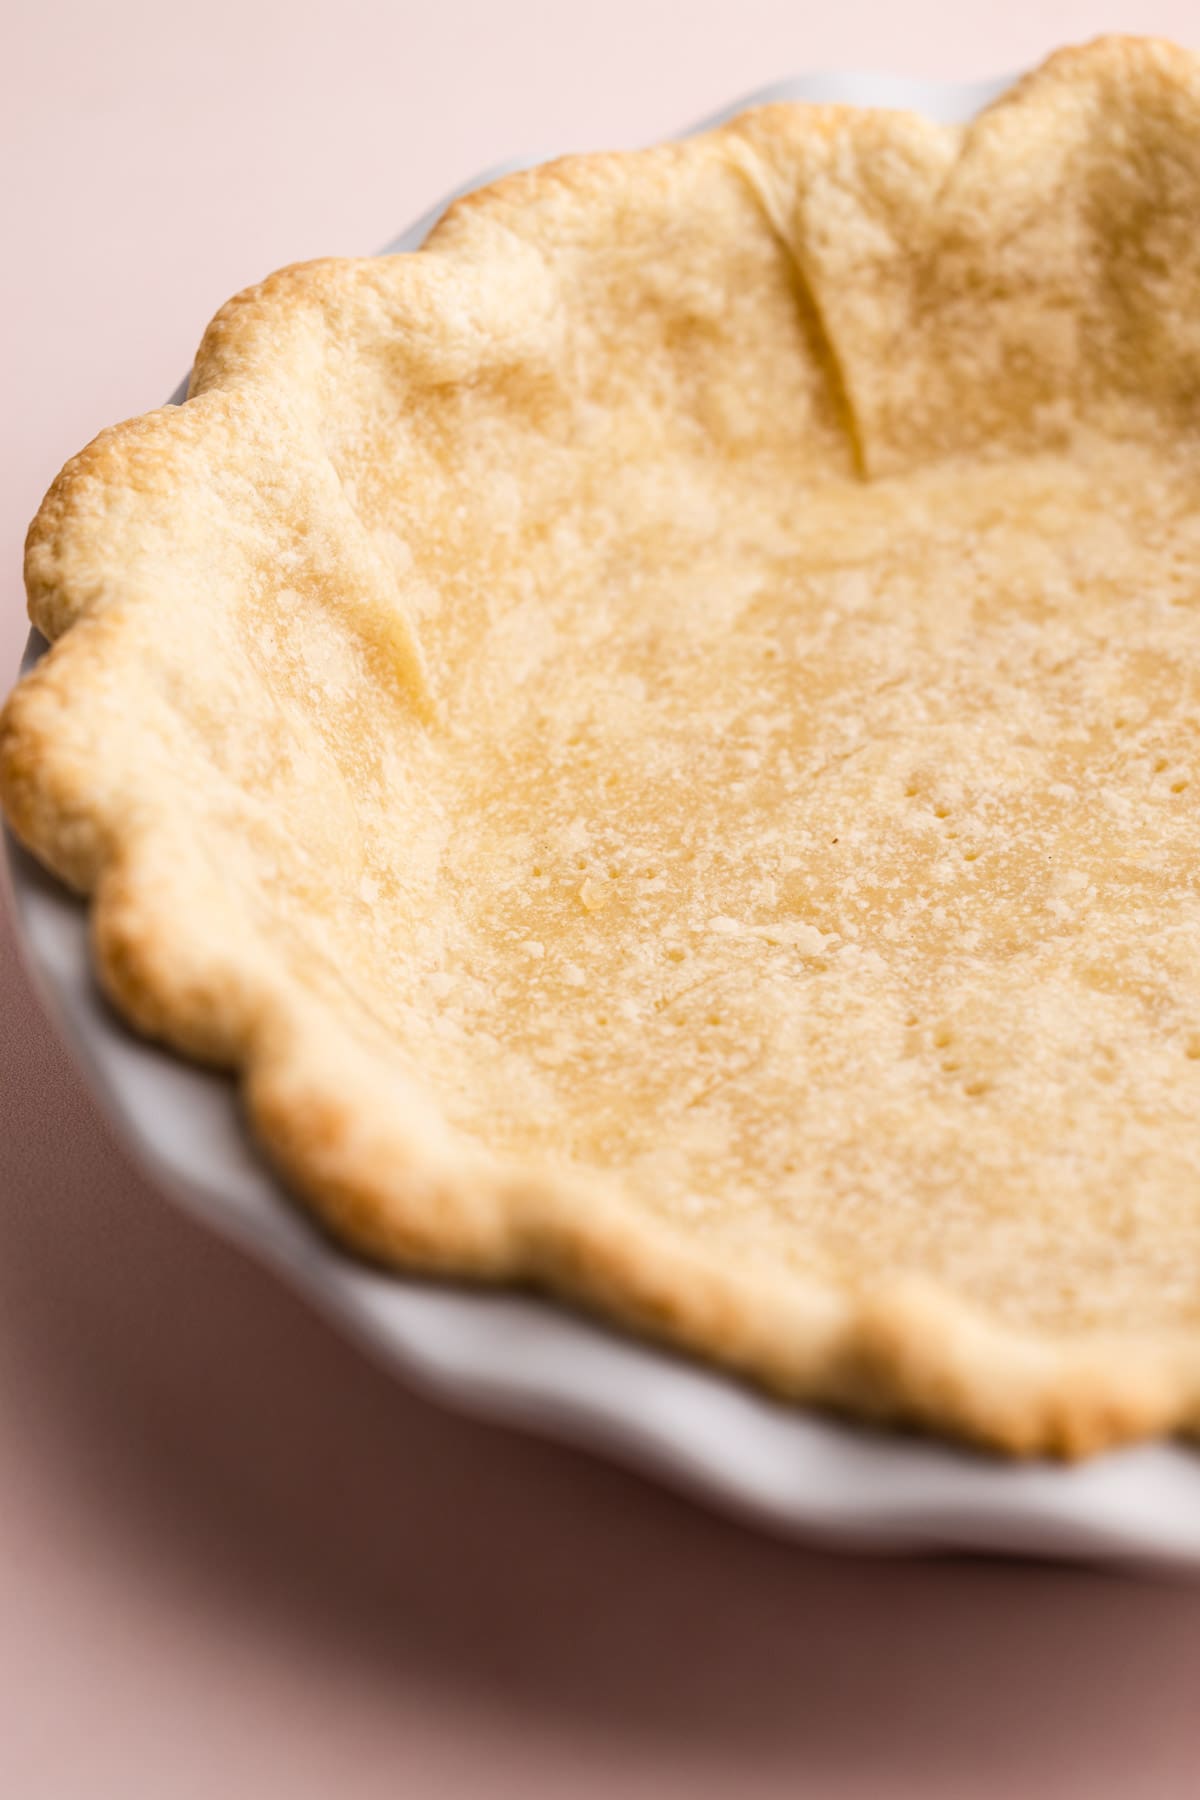 A fully baked pie crust.